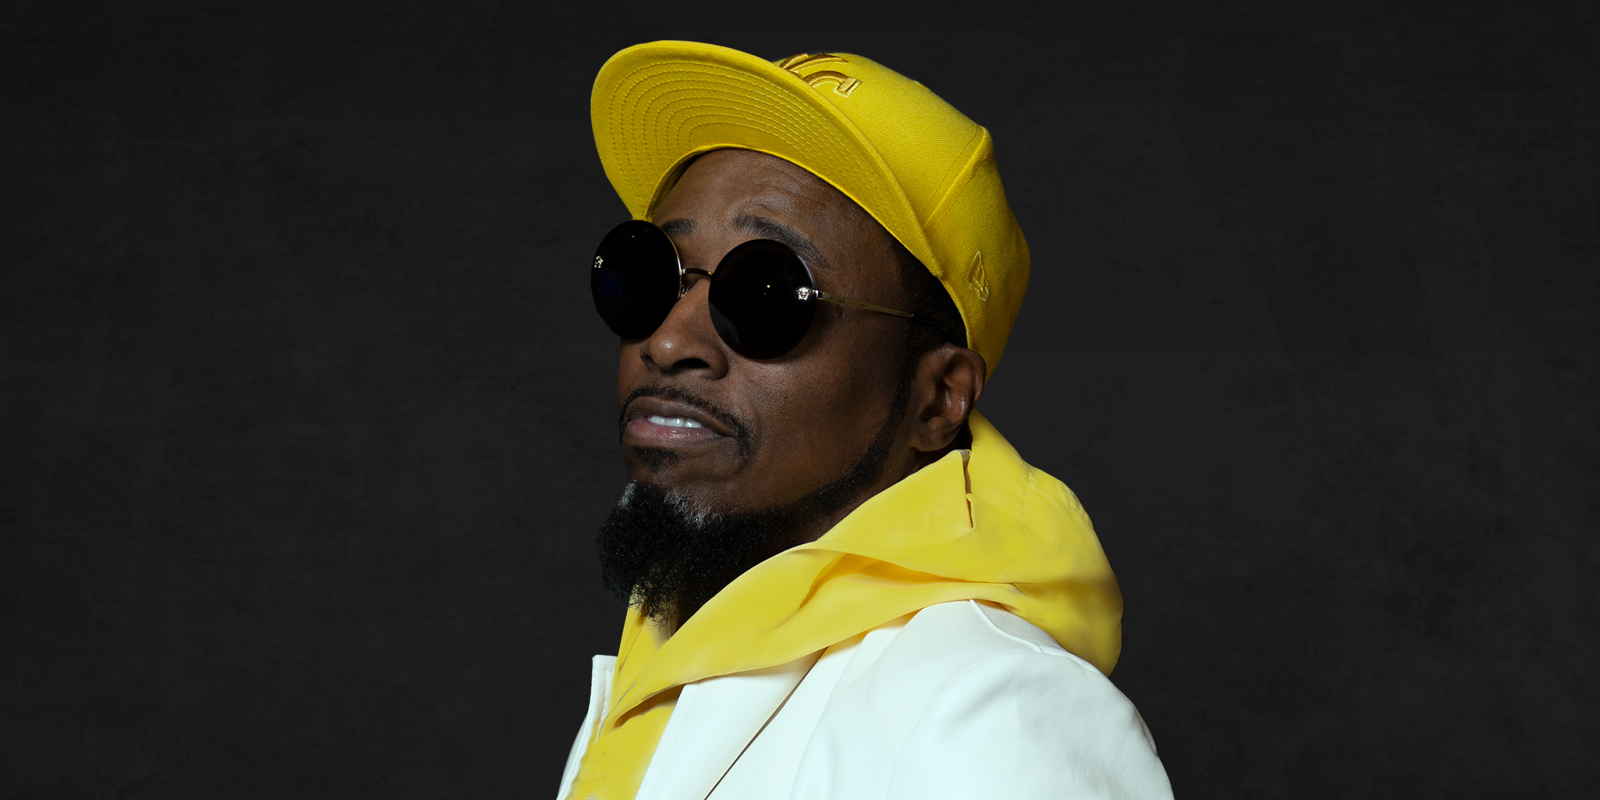 Image of Eddie Griffin with a yellow hat